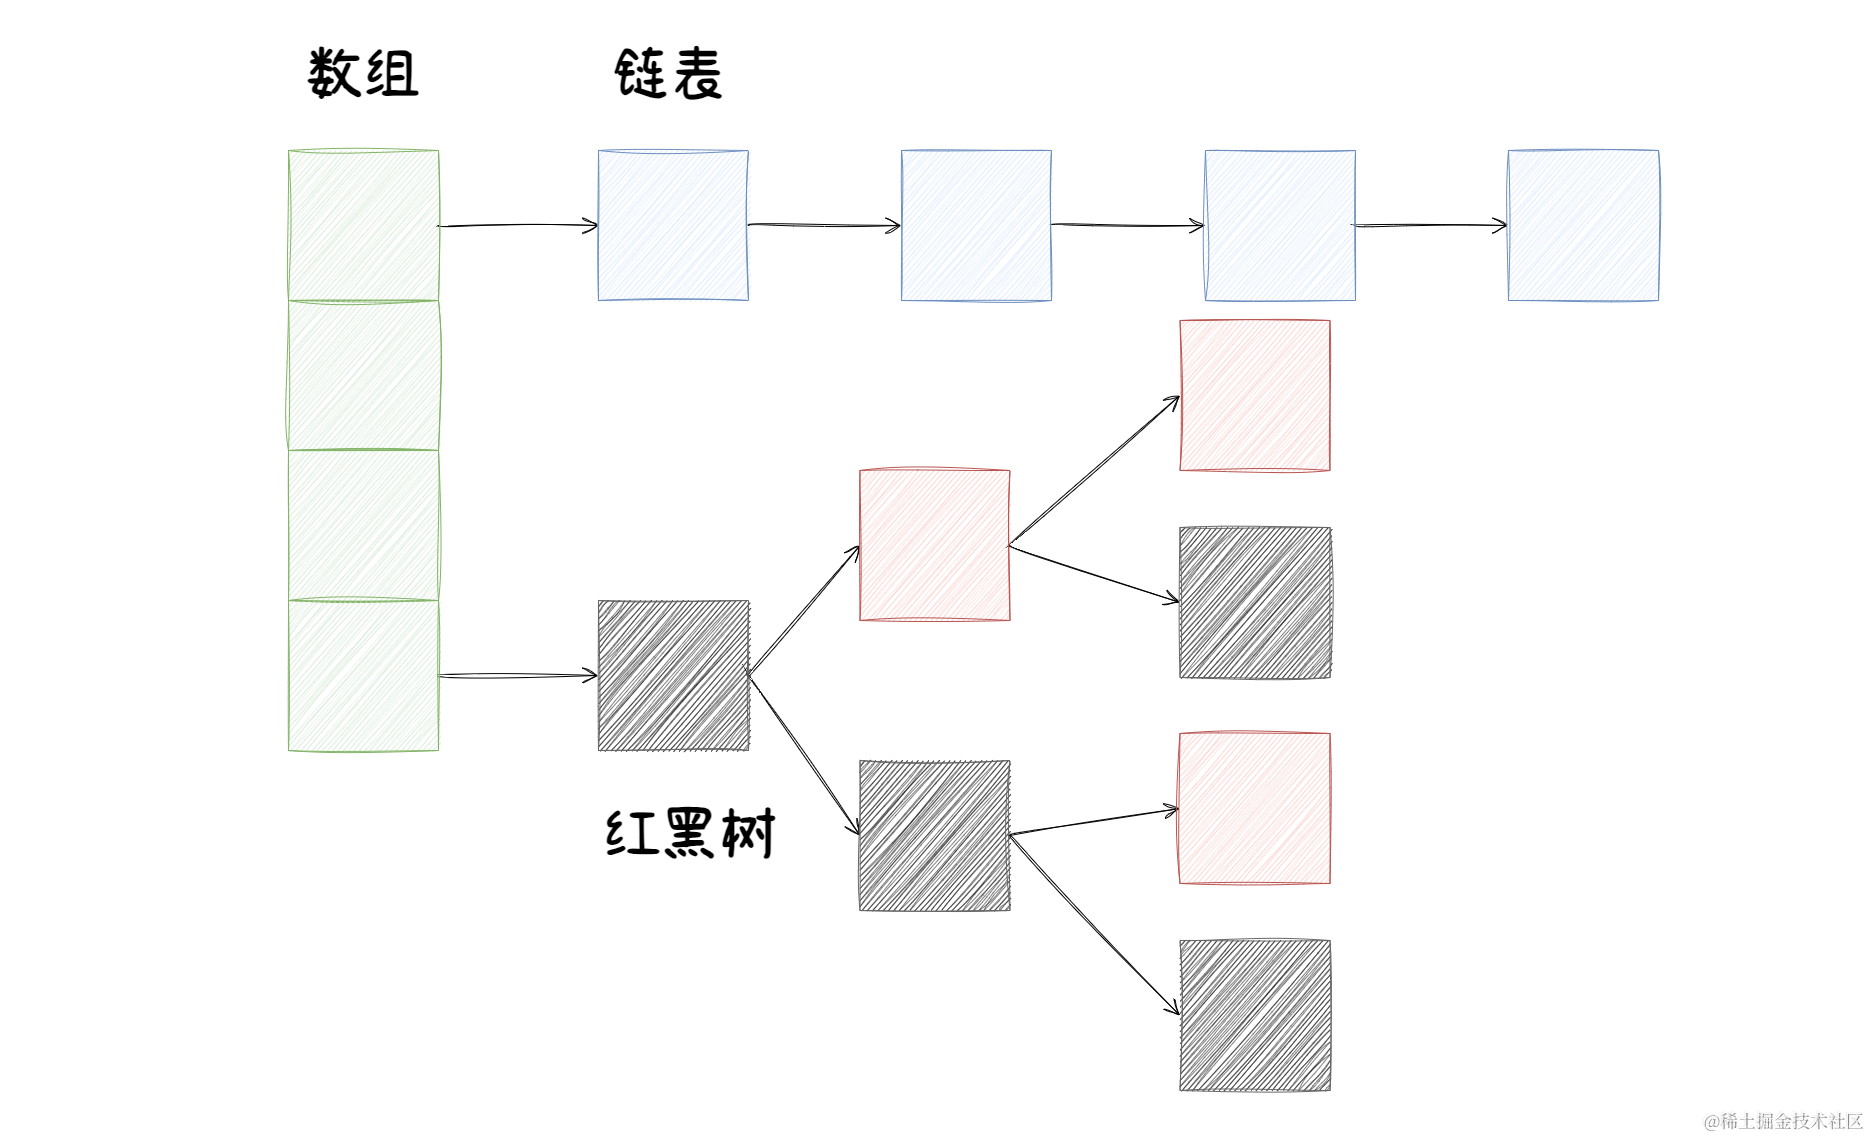 HashMap-第 2 页.drawio.png